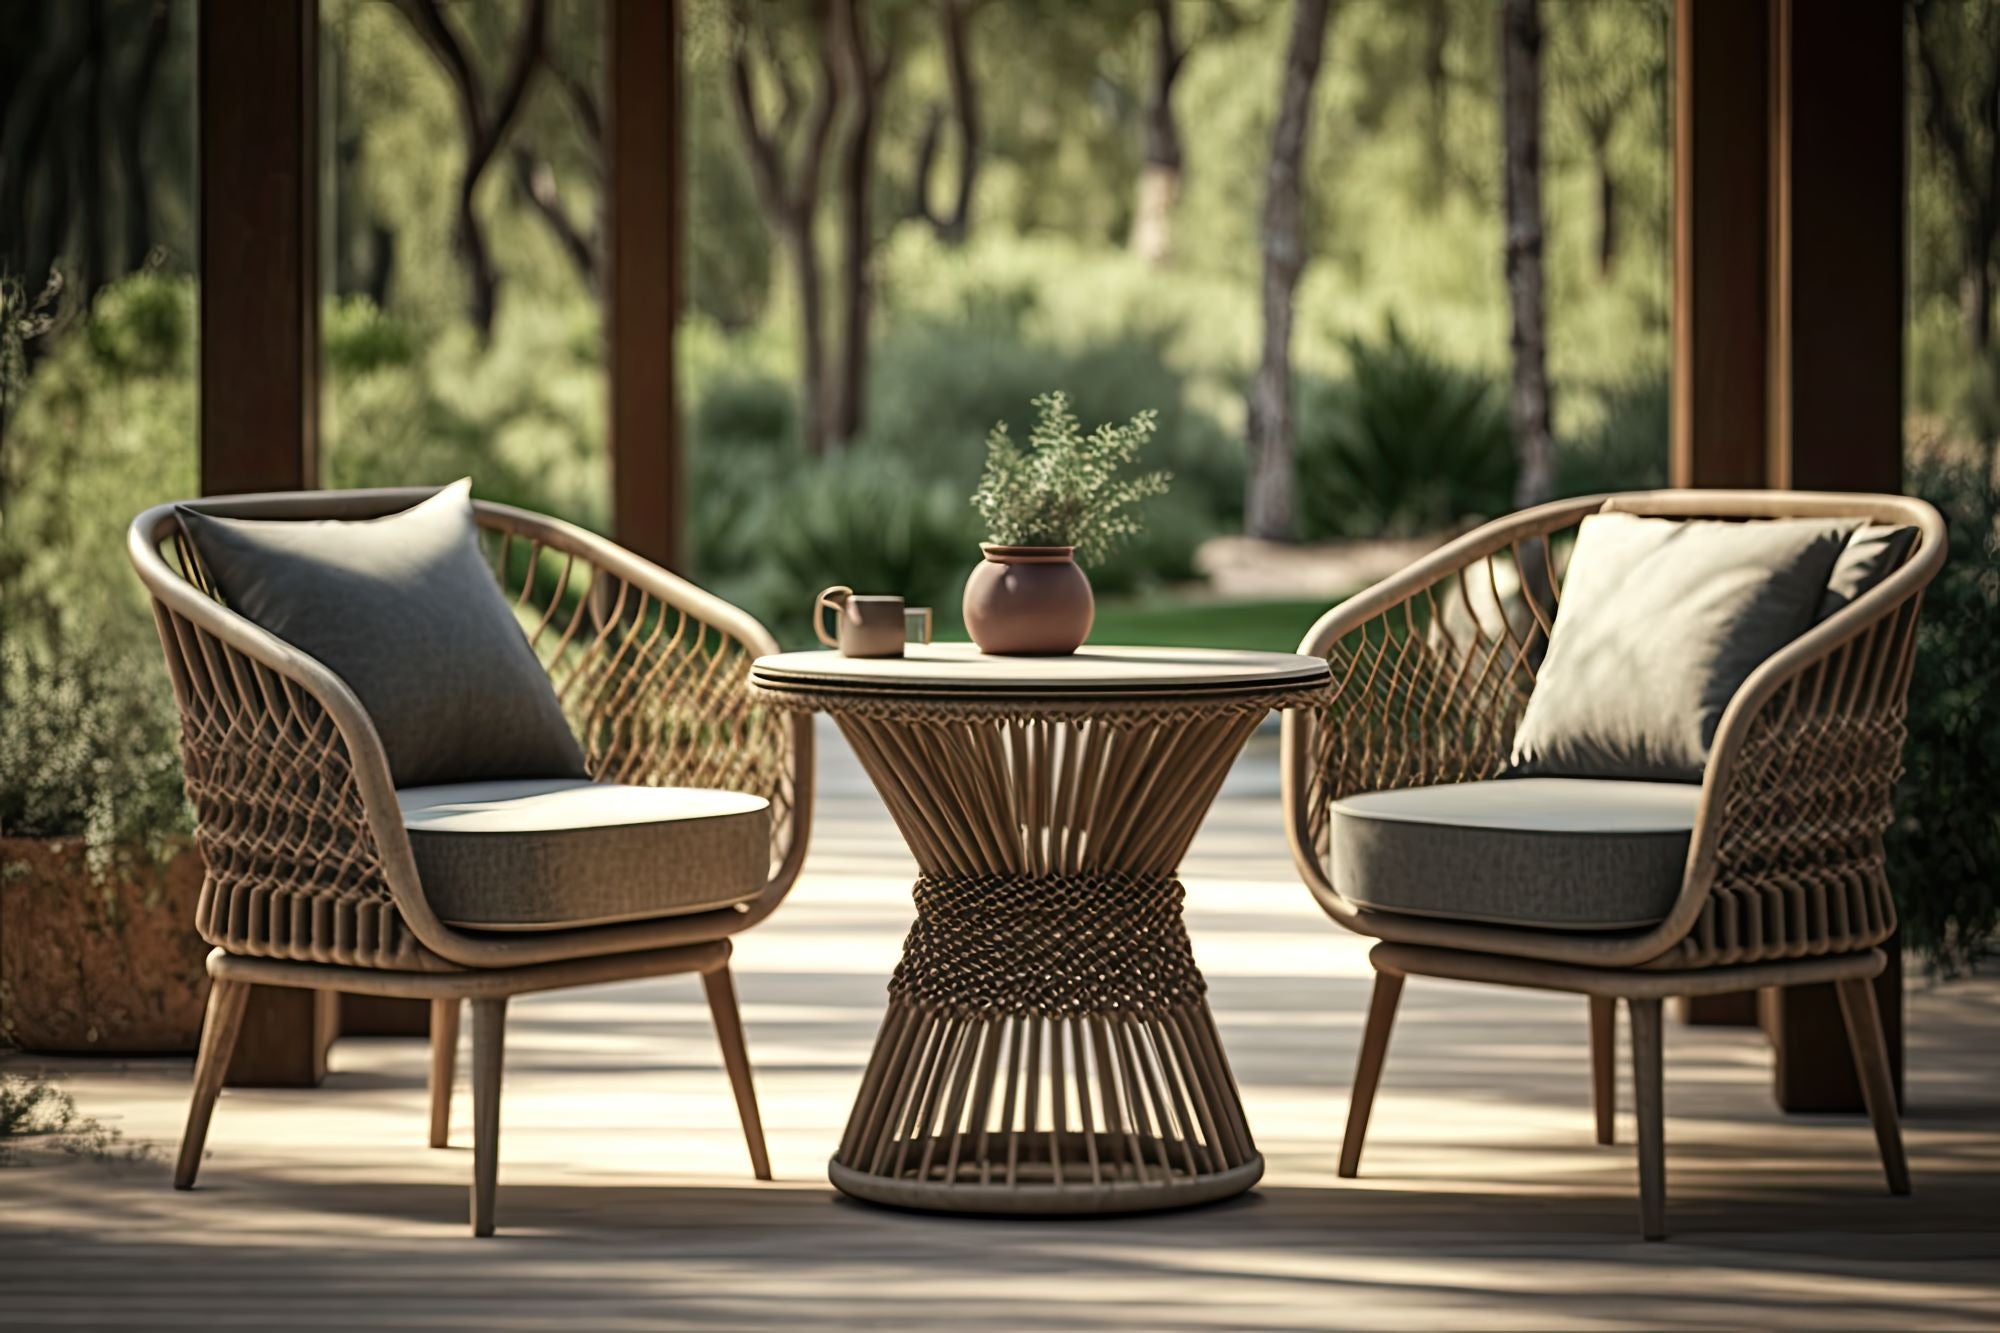 5 Tips And Practices To Look After Your Premium Garden Furniture